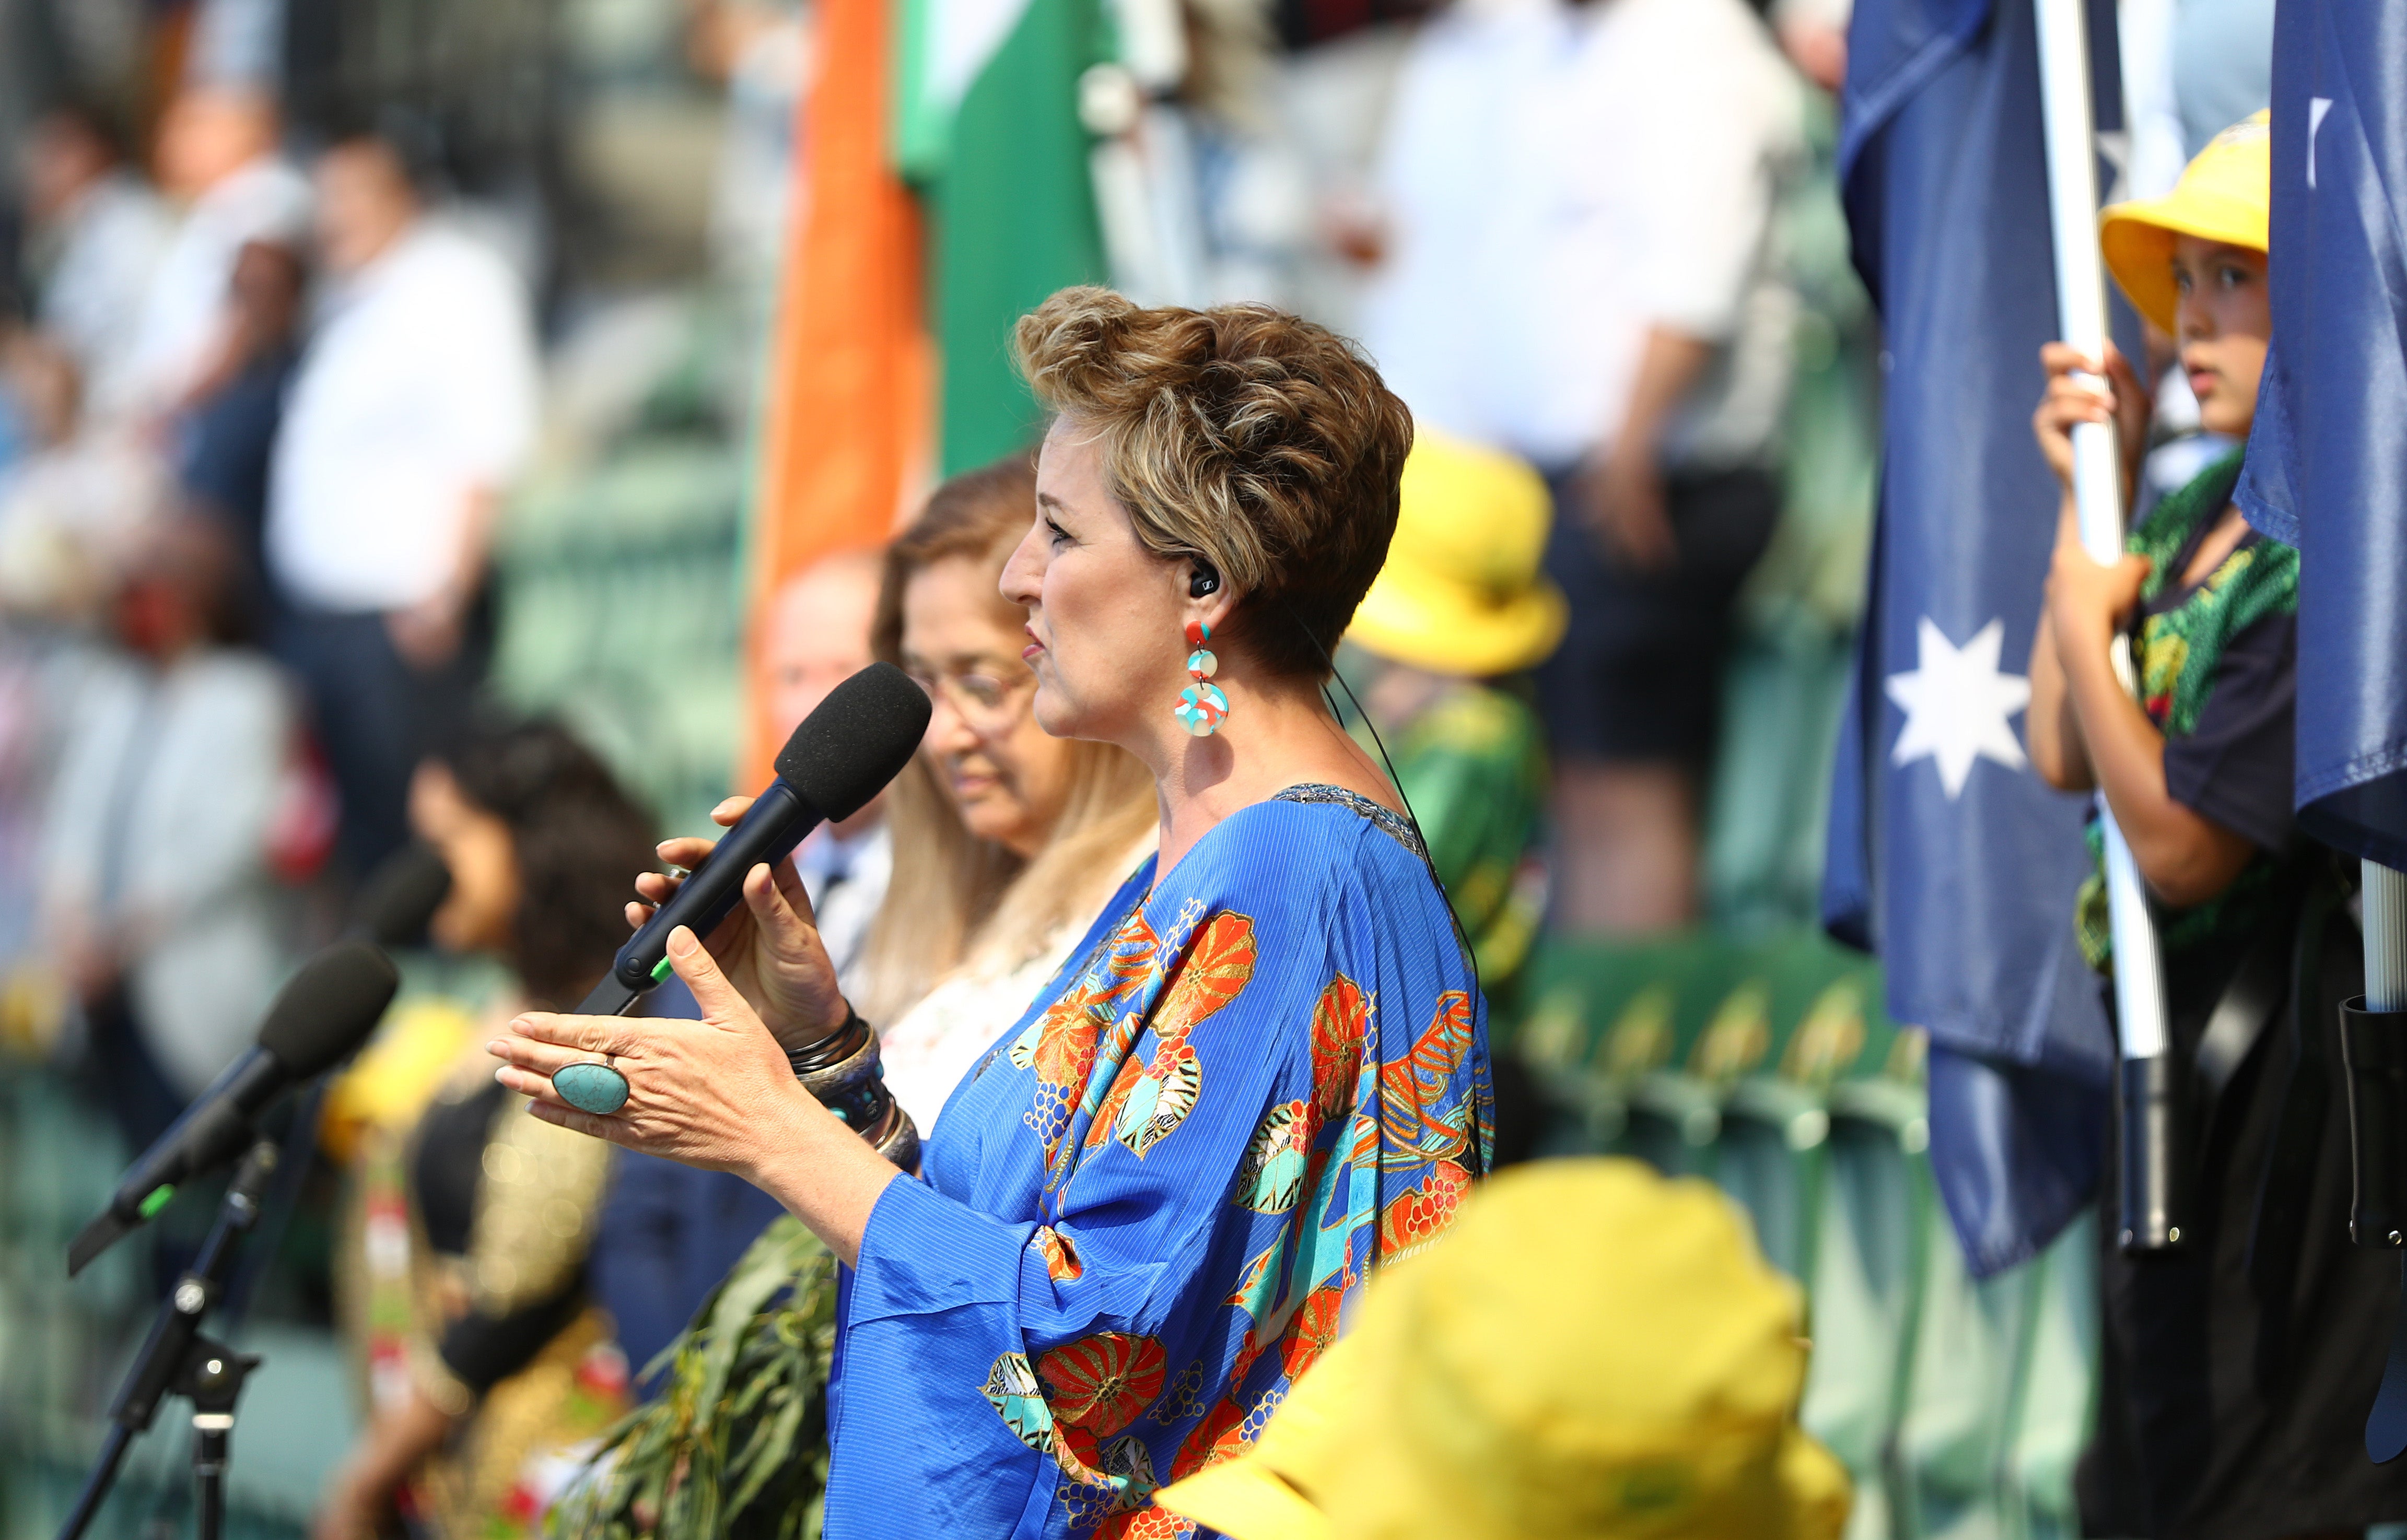 File Image: The Australian national anthem is sung during day one of the Second Test match between Australia and India at Melbourne Cricket Ground on December 26, 2020